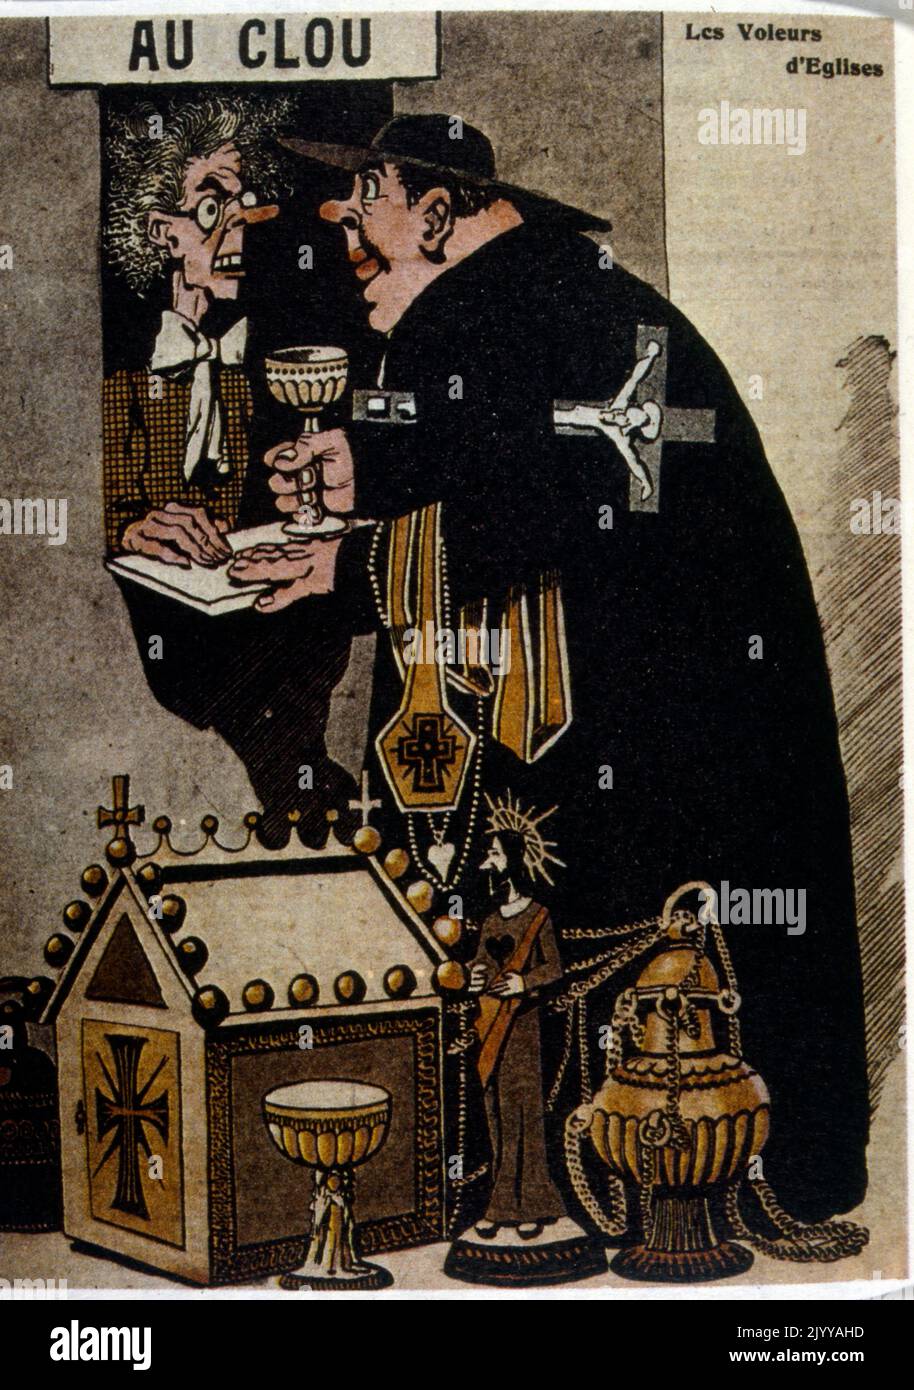 A priest at a pawn shop window trying to cash in the gold and silver from the church altars captioned "The thieves of the Church". Stock Photo